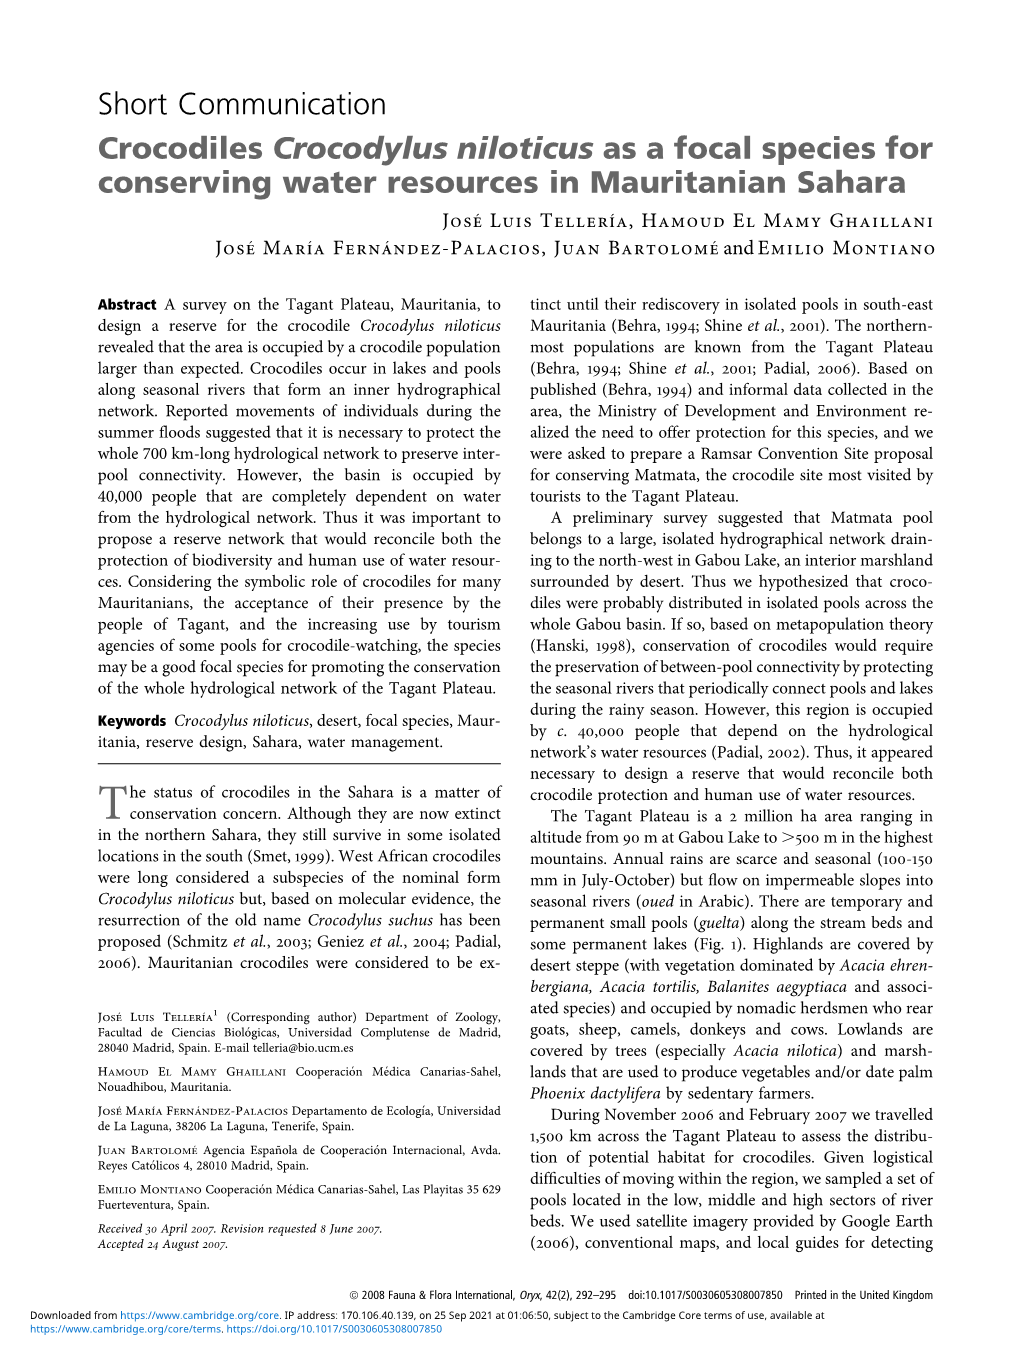 Short Communication Crocodiles Crocodylus Niloticus As a Focal Species for Conserving Water Resources in Mauritanian Sahara